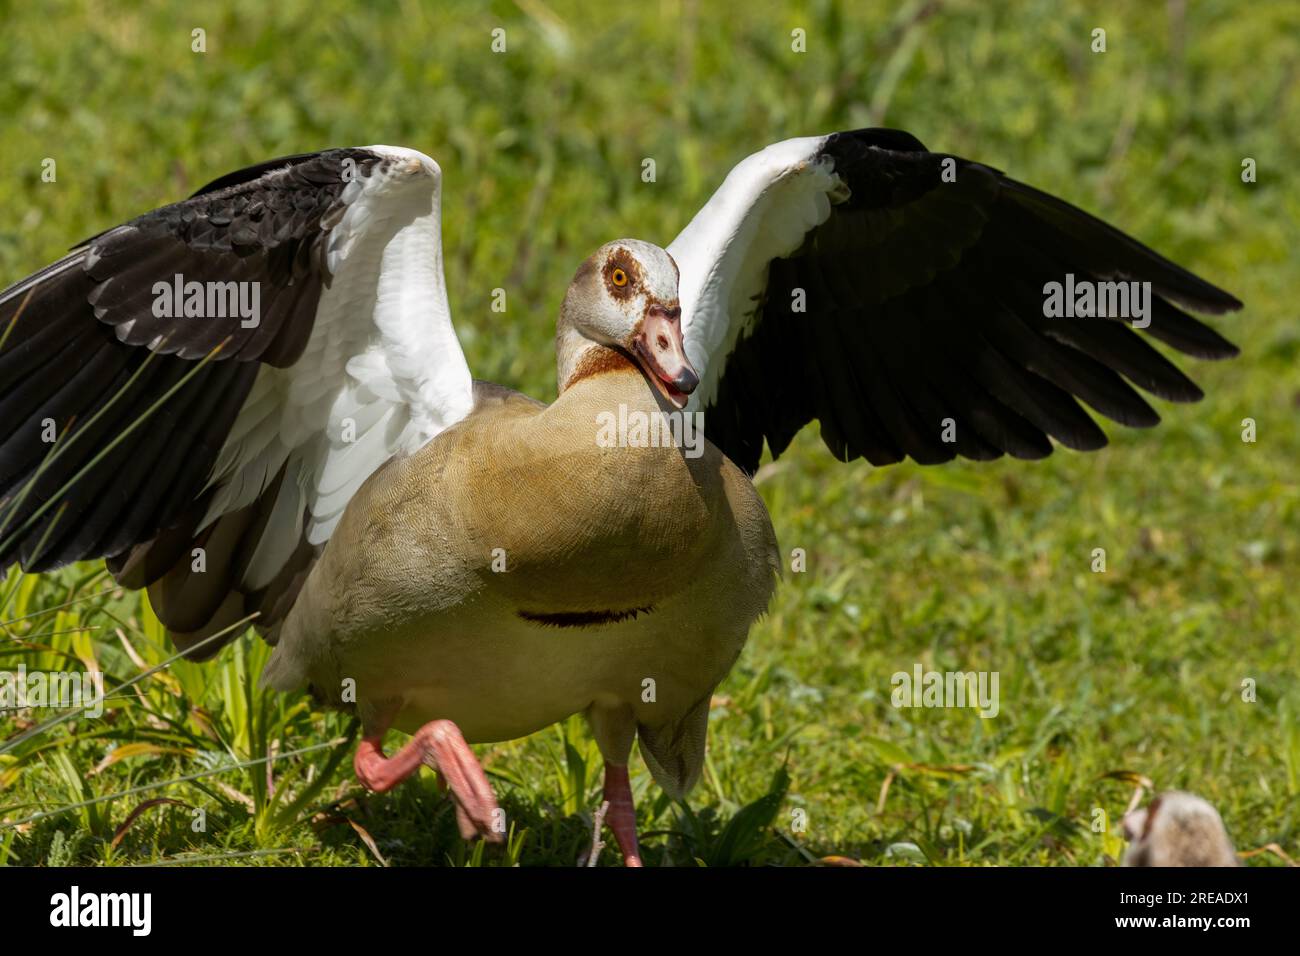 Egyptian goose with wings out running across the grass protecting goslings Stock Photo